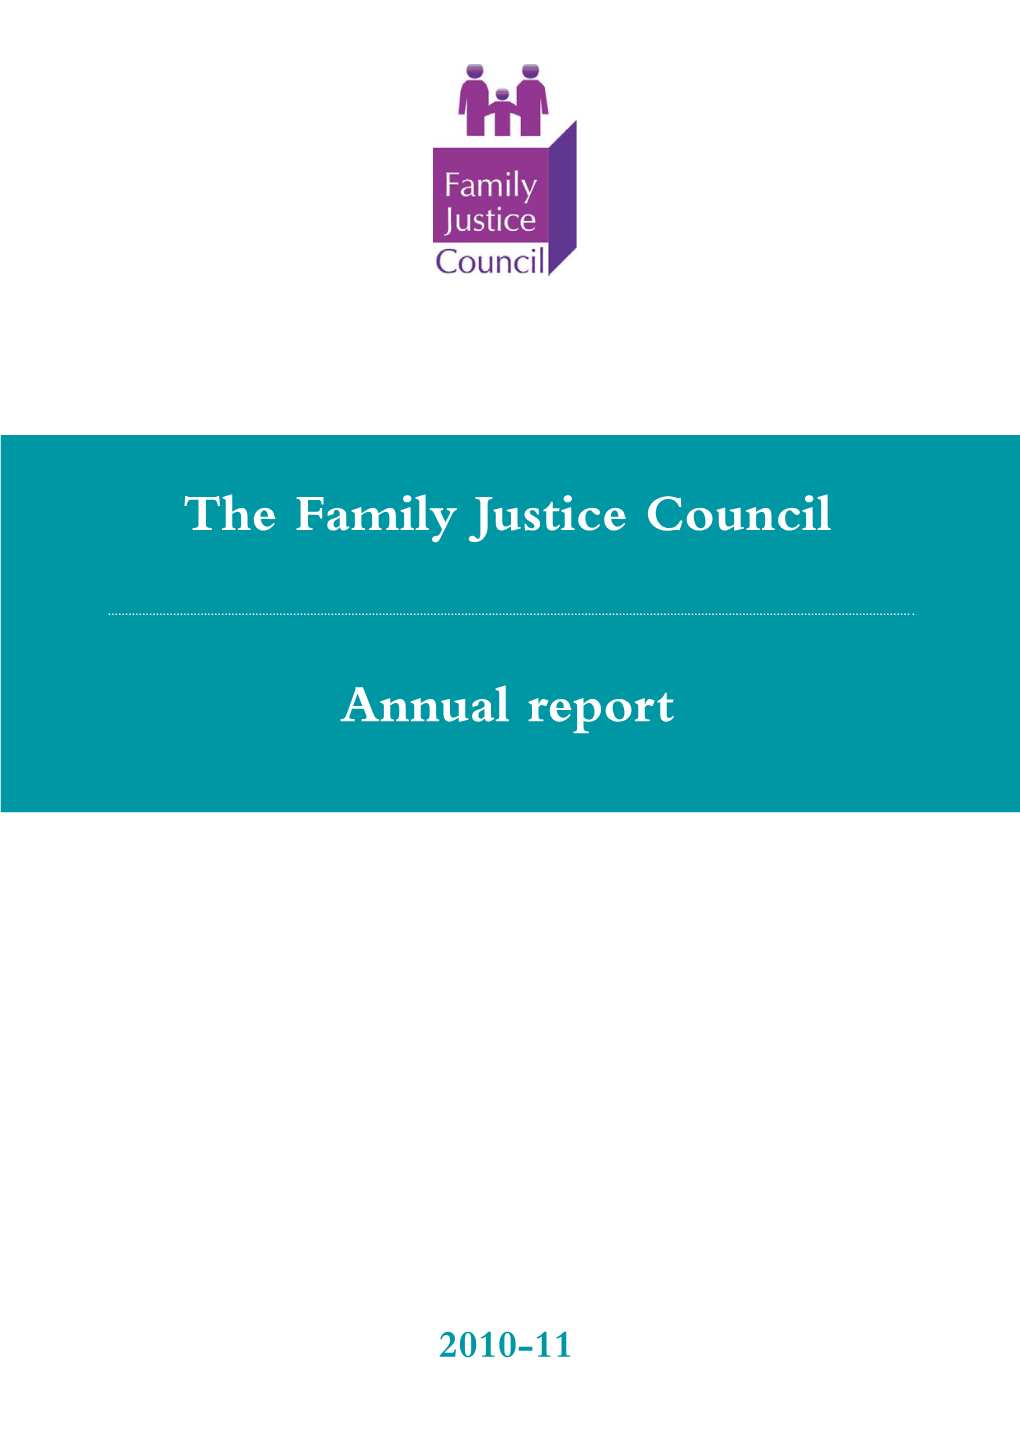 The Family Justice Council Annual Report